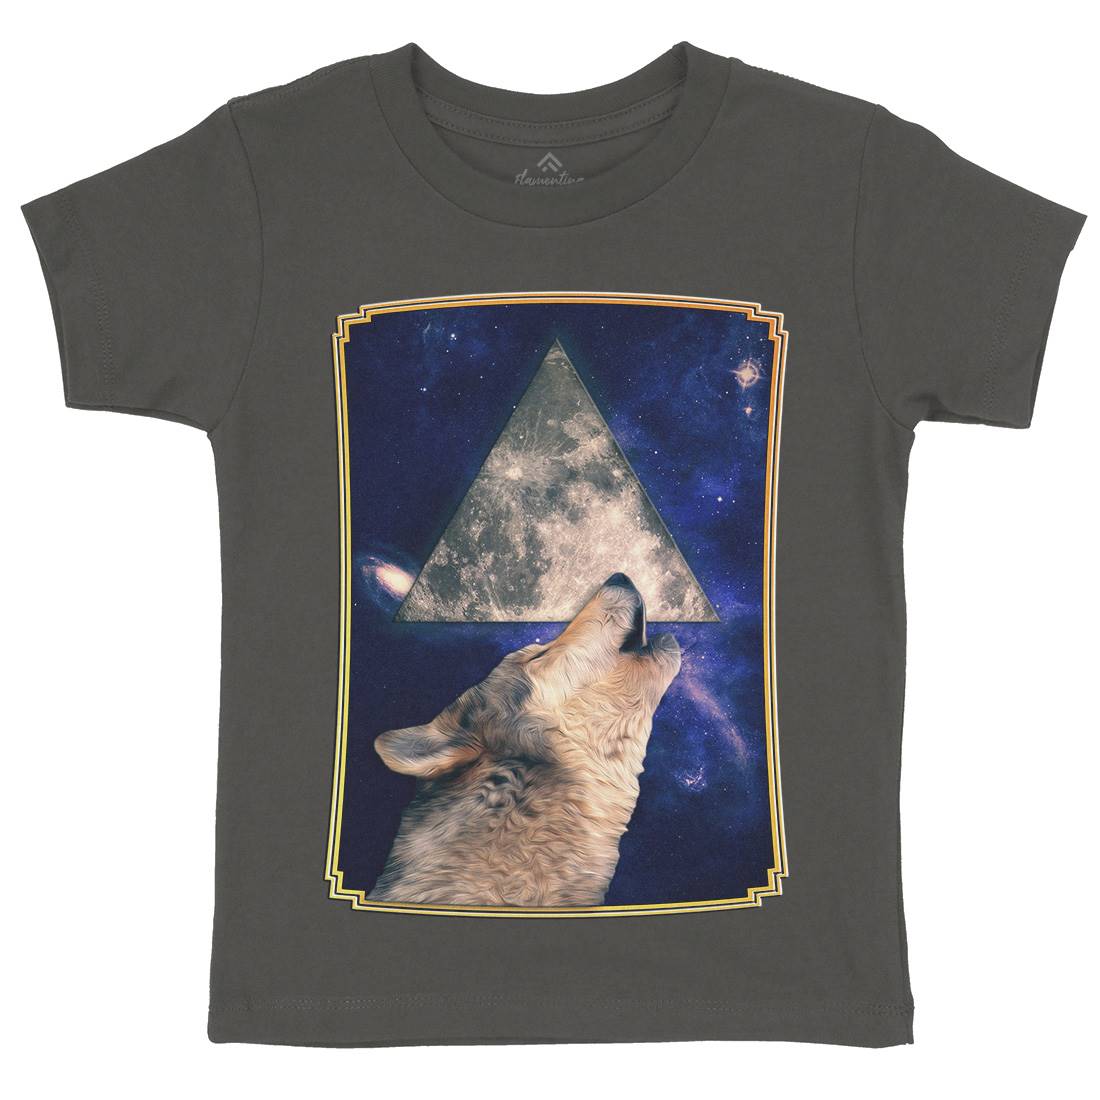 Howling Wolf Kids Crew Neck T-Shirt Space A848